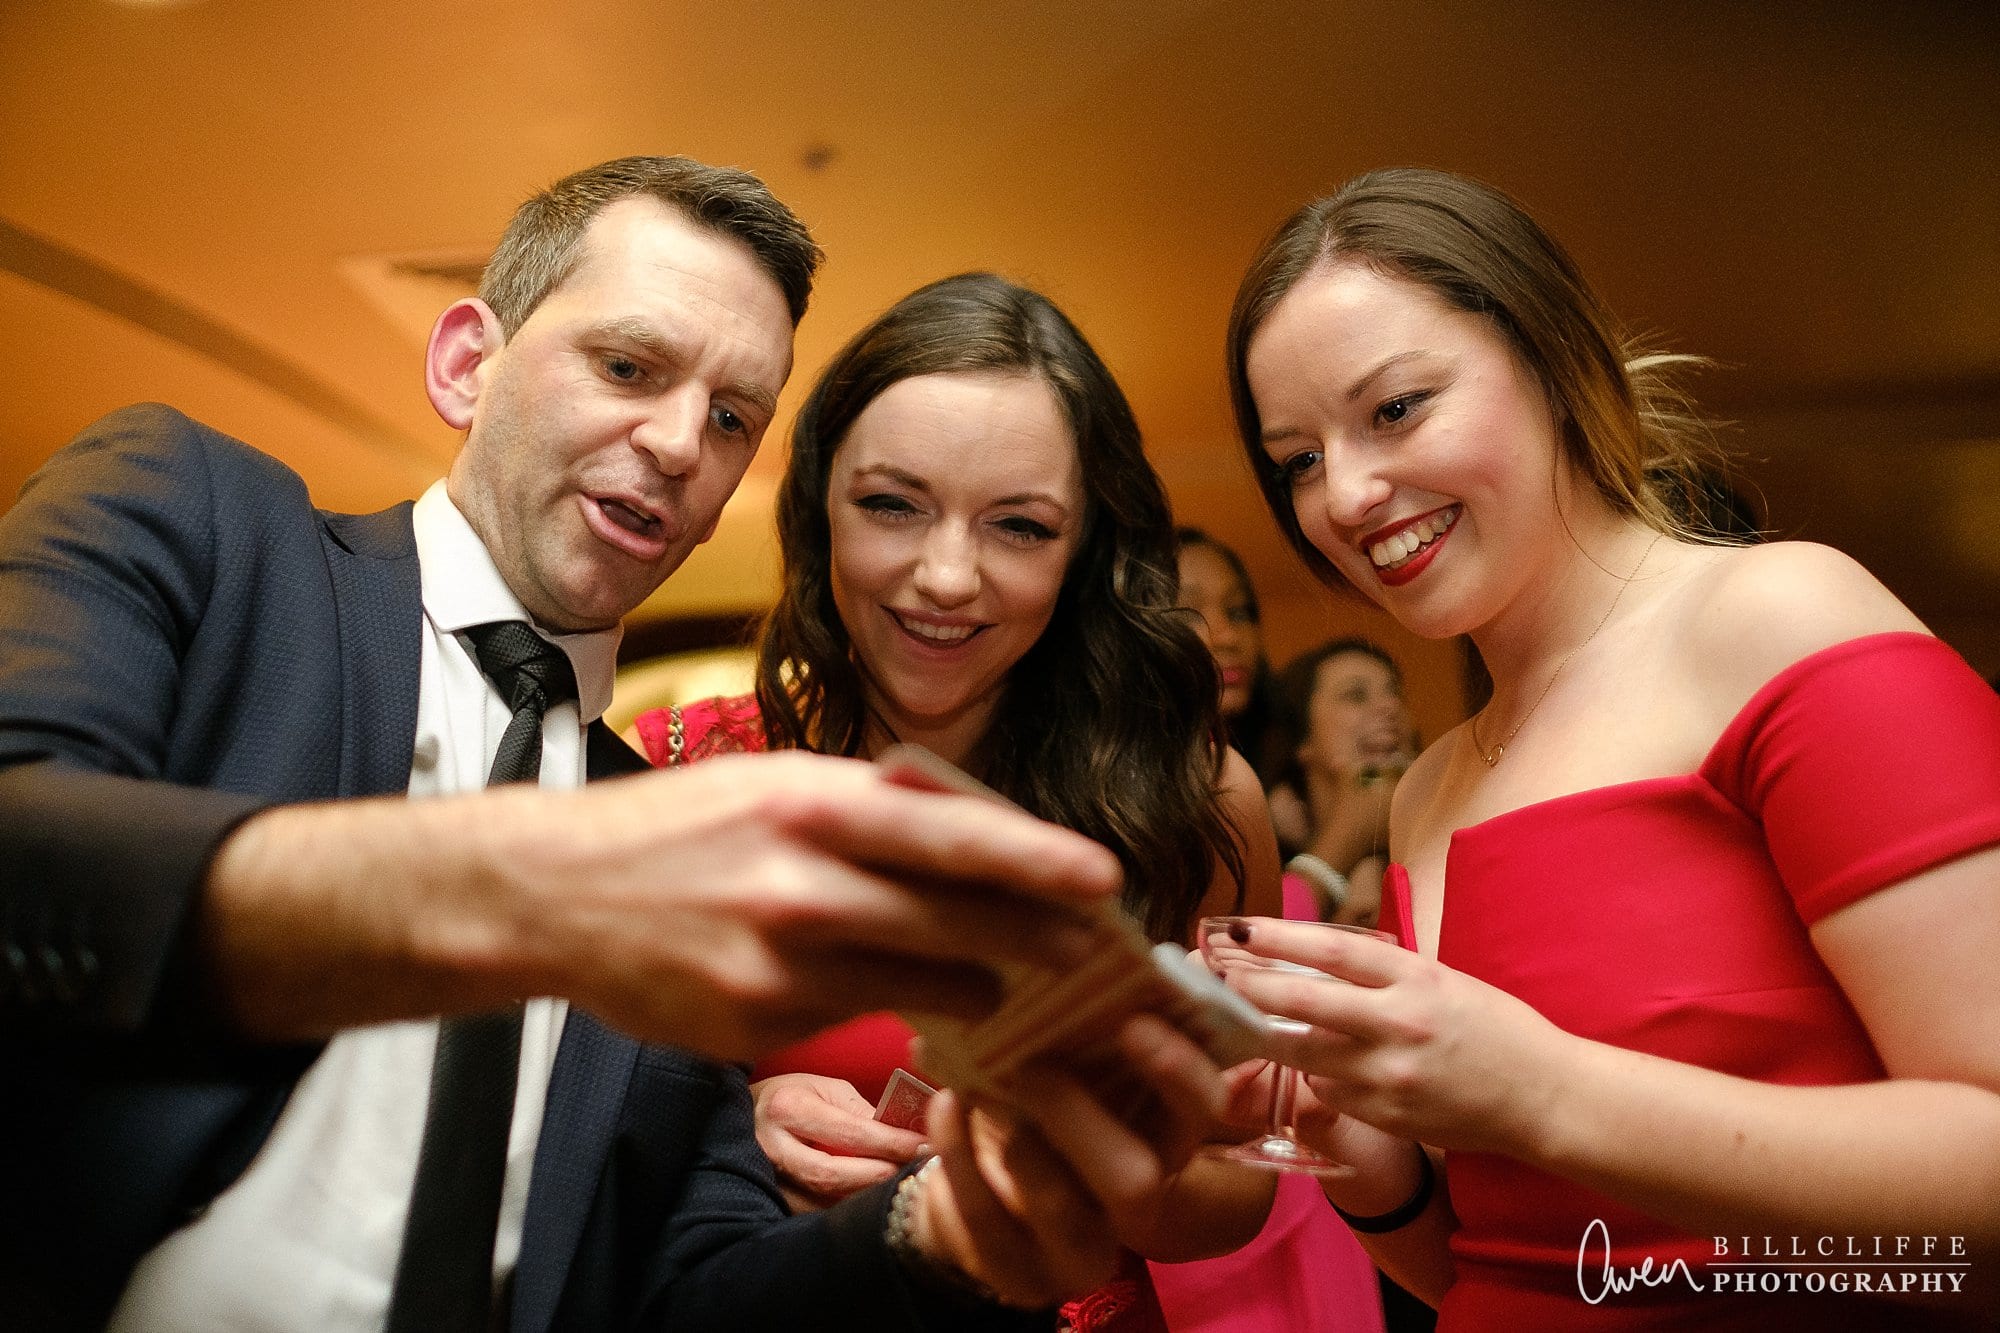 london wedding photographer magician lee smith 020 - Event Entertainer Spotlight: Lee Smith, Walkabout Magician